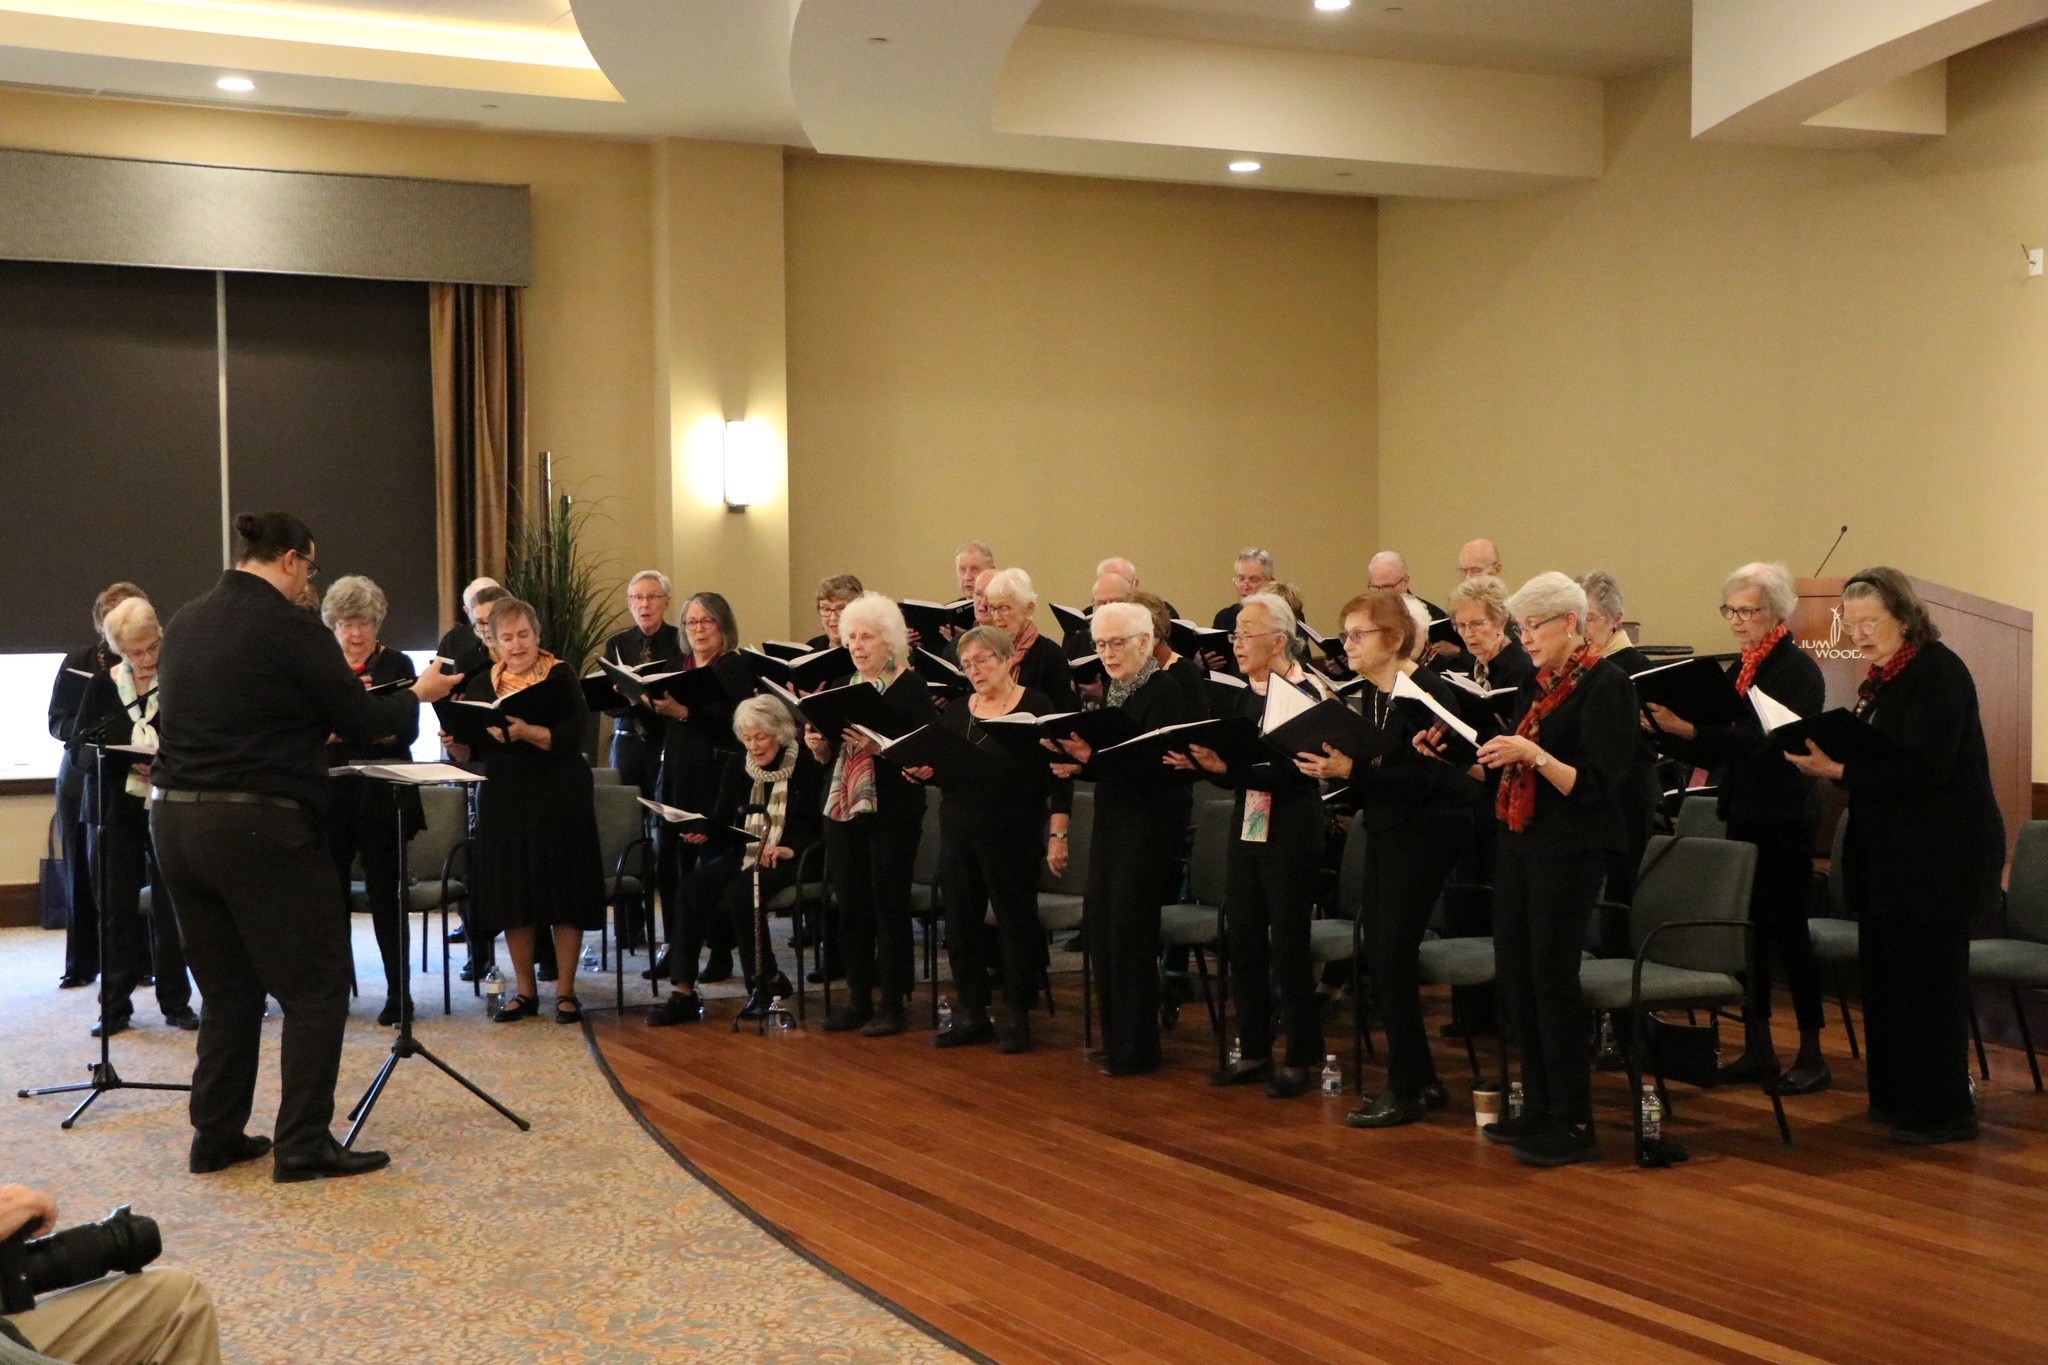 Trillium Woods Chorale Helps Neighbors Connect, Express Themselves, and Make Memories